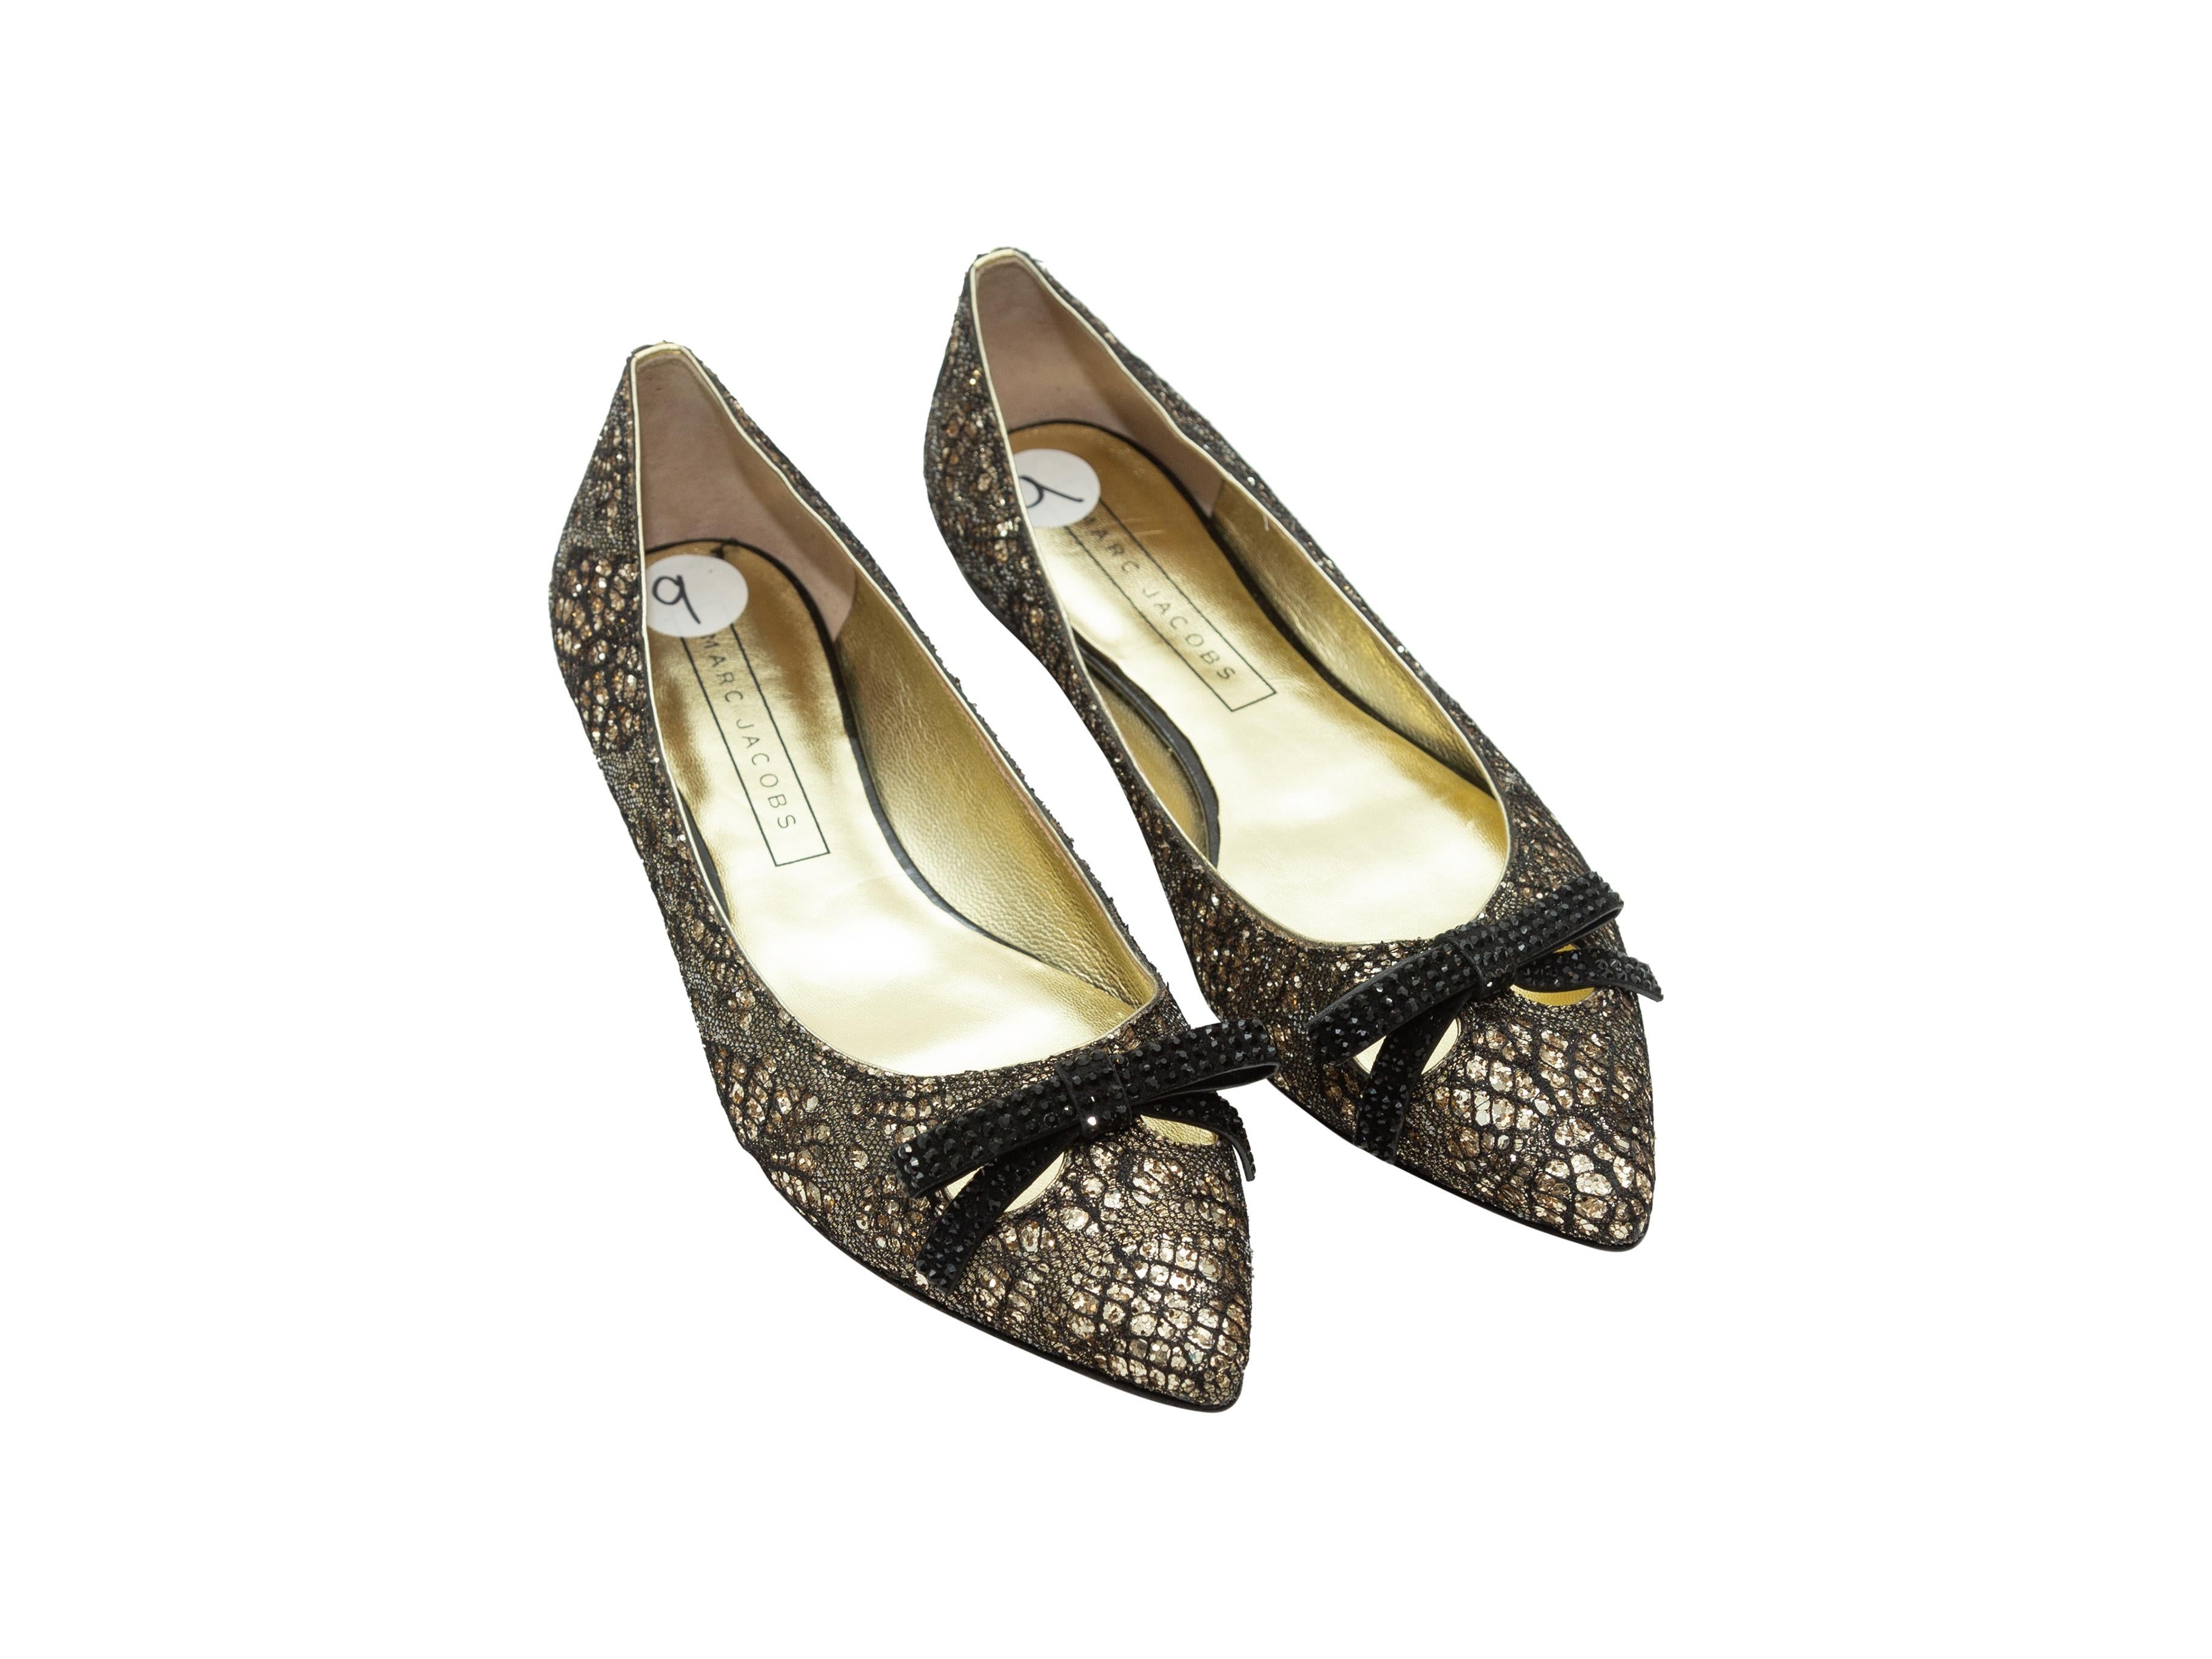 Product details: Gold and black metallic lace pointed-toe flats by Marc Jacobs. Bow embellishments at tops. Designer size 39.
Condition: Pre-owned. Excellent.